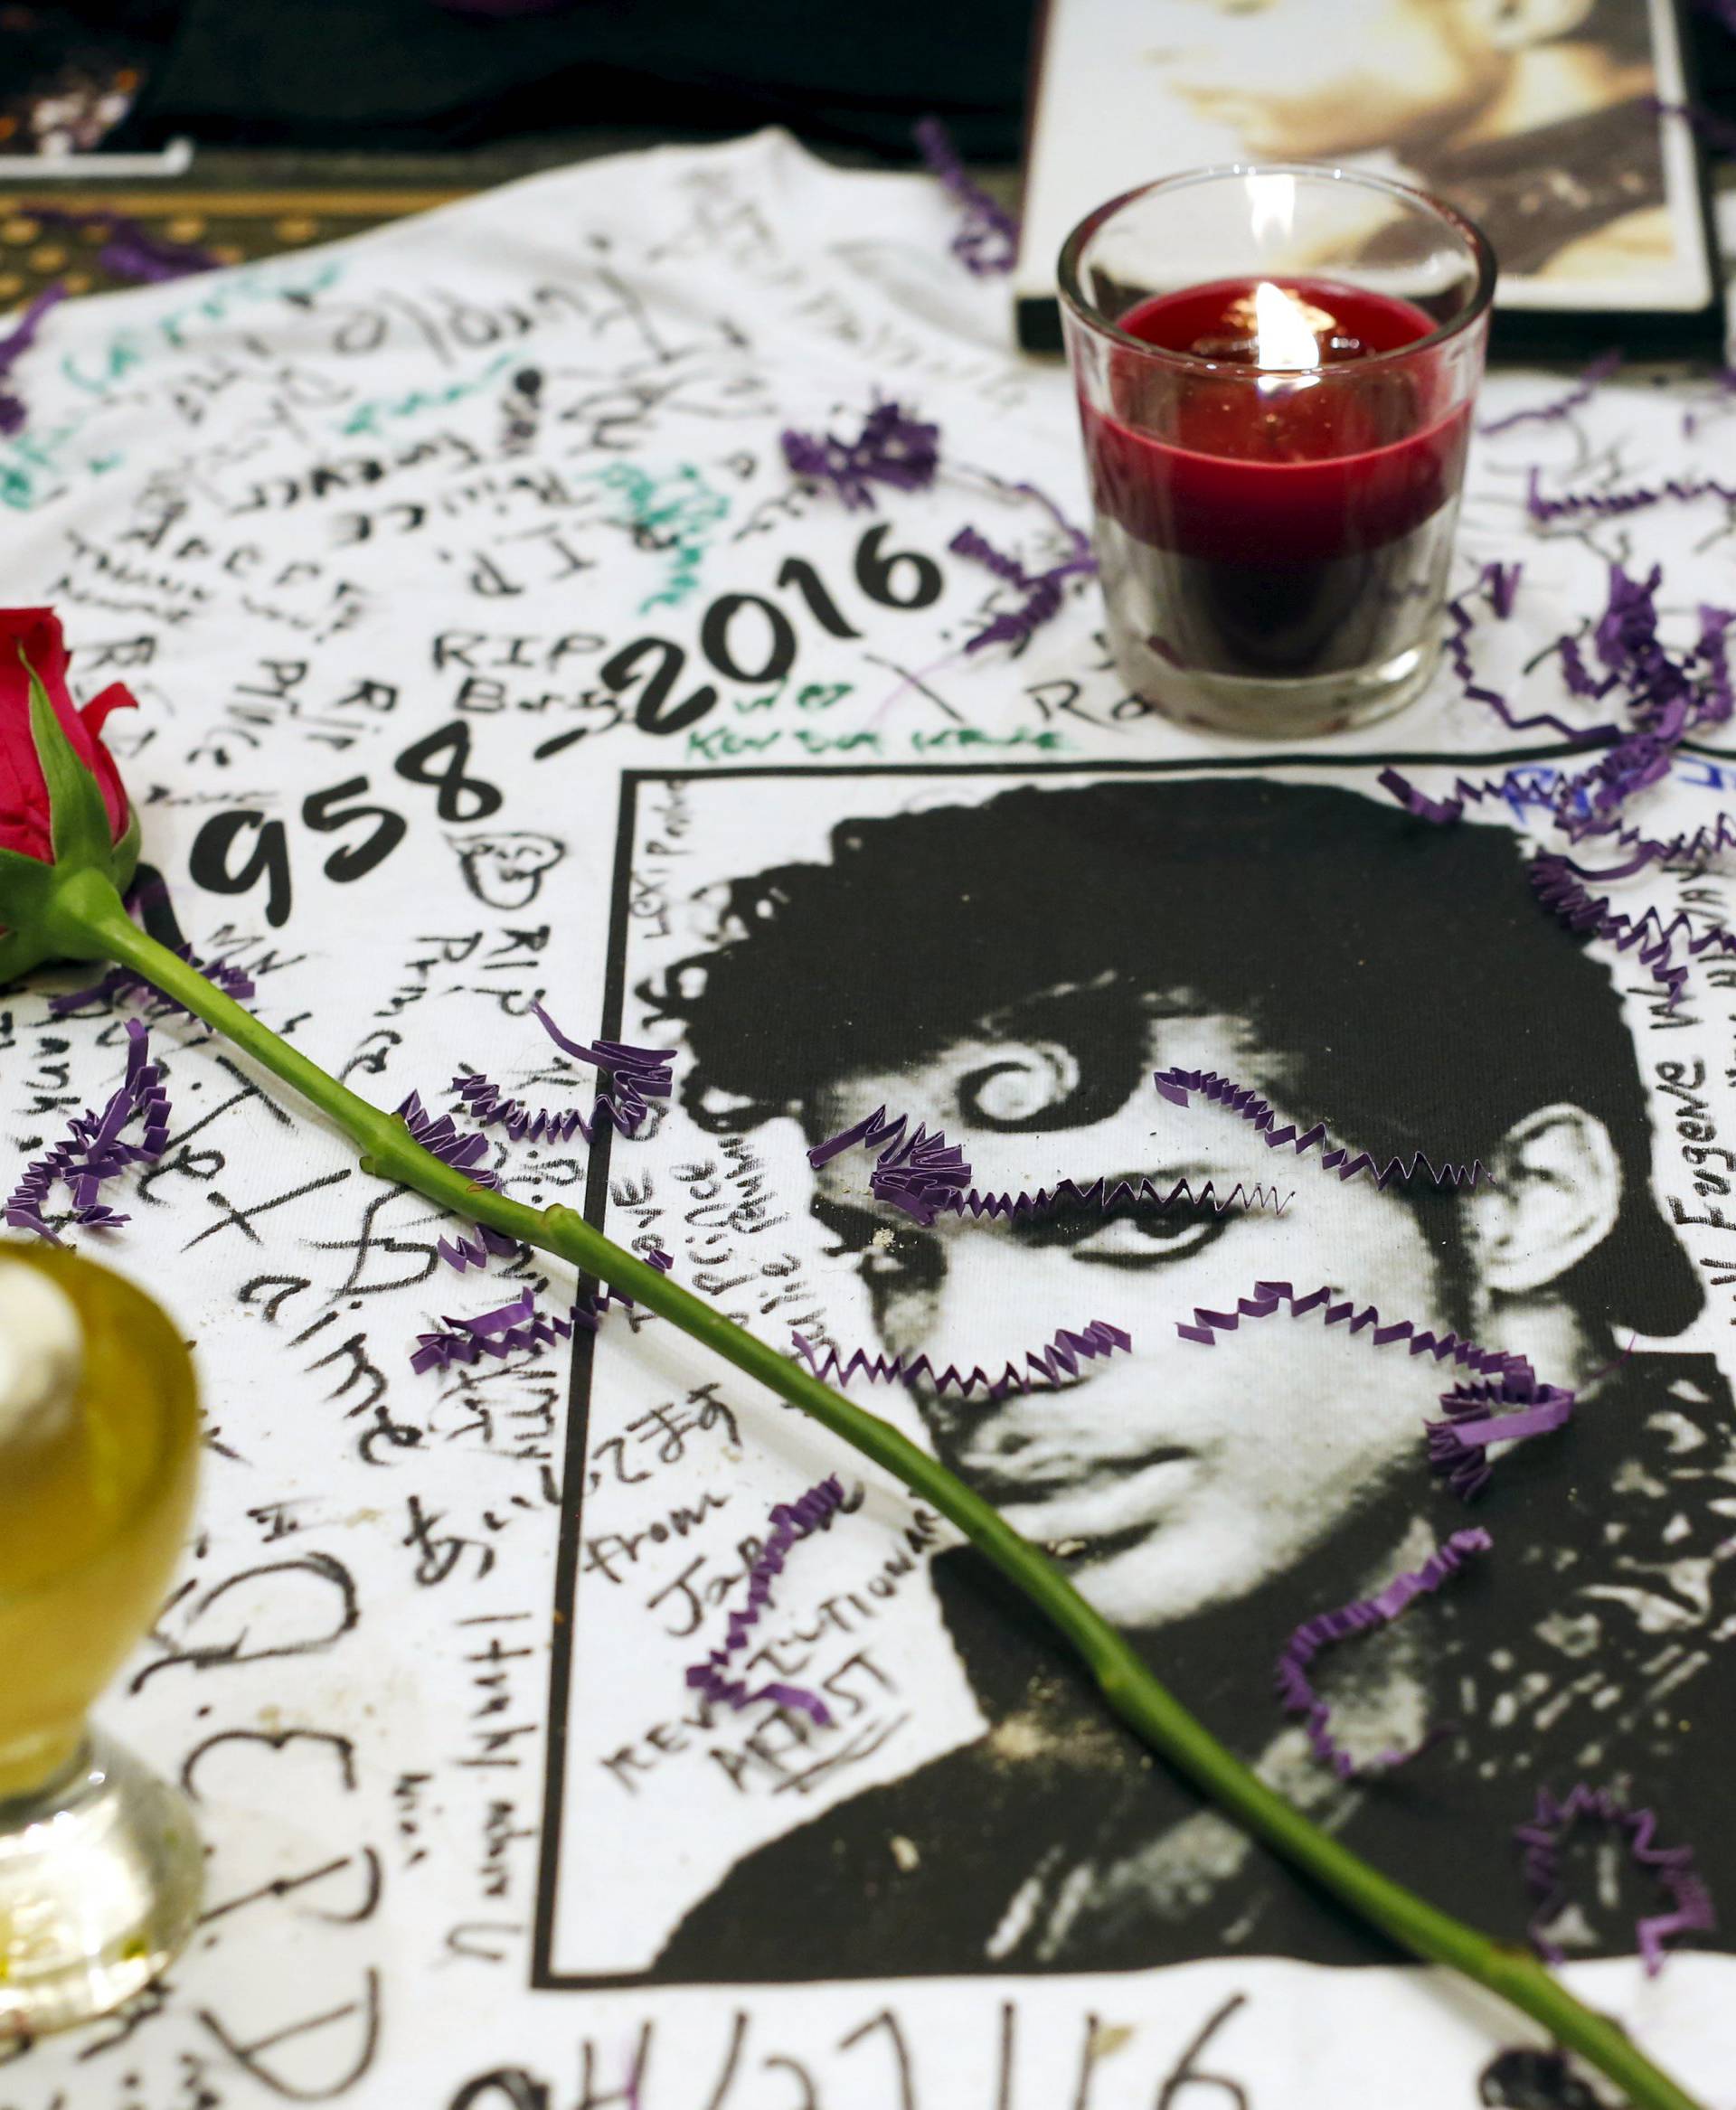 A makeshift memorial is seen as fans gather at Harlem's Apollo Theater to celebrate the life of deceased musician Prince in the Manhattan borough of New York, U.S.